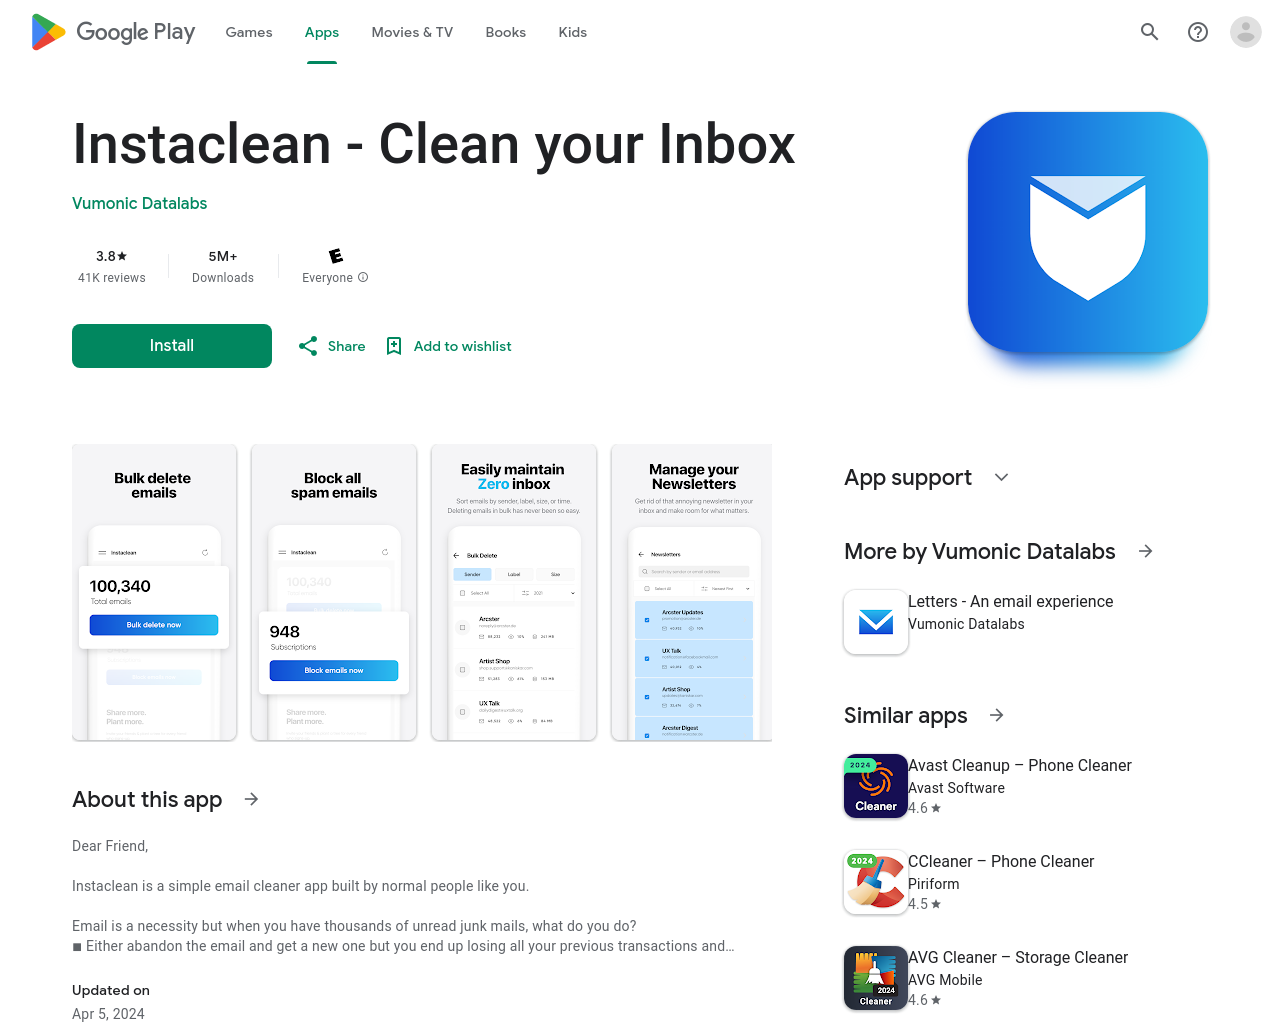 Mr. Clean - I keep your gmail inbox healthy